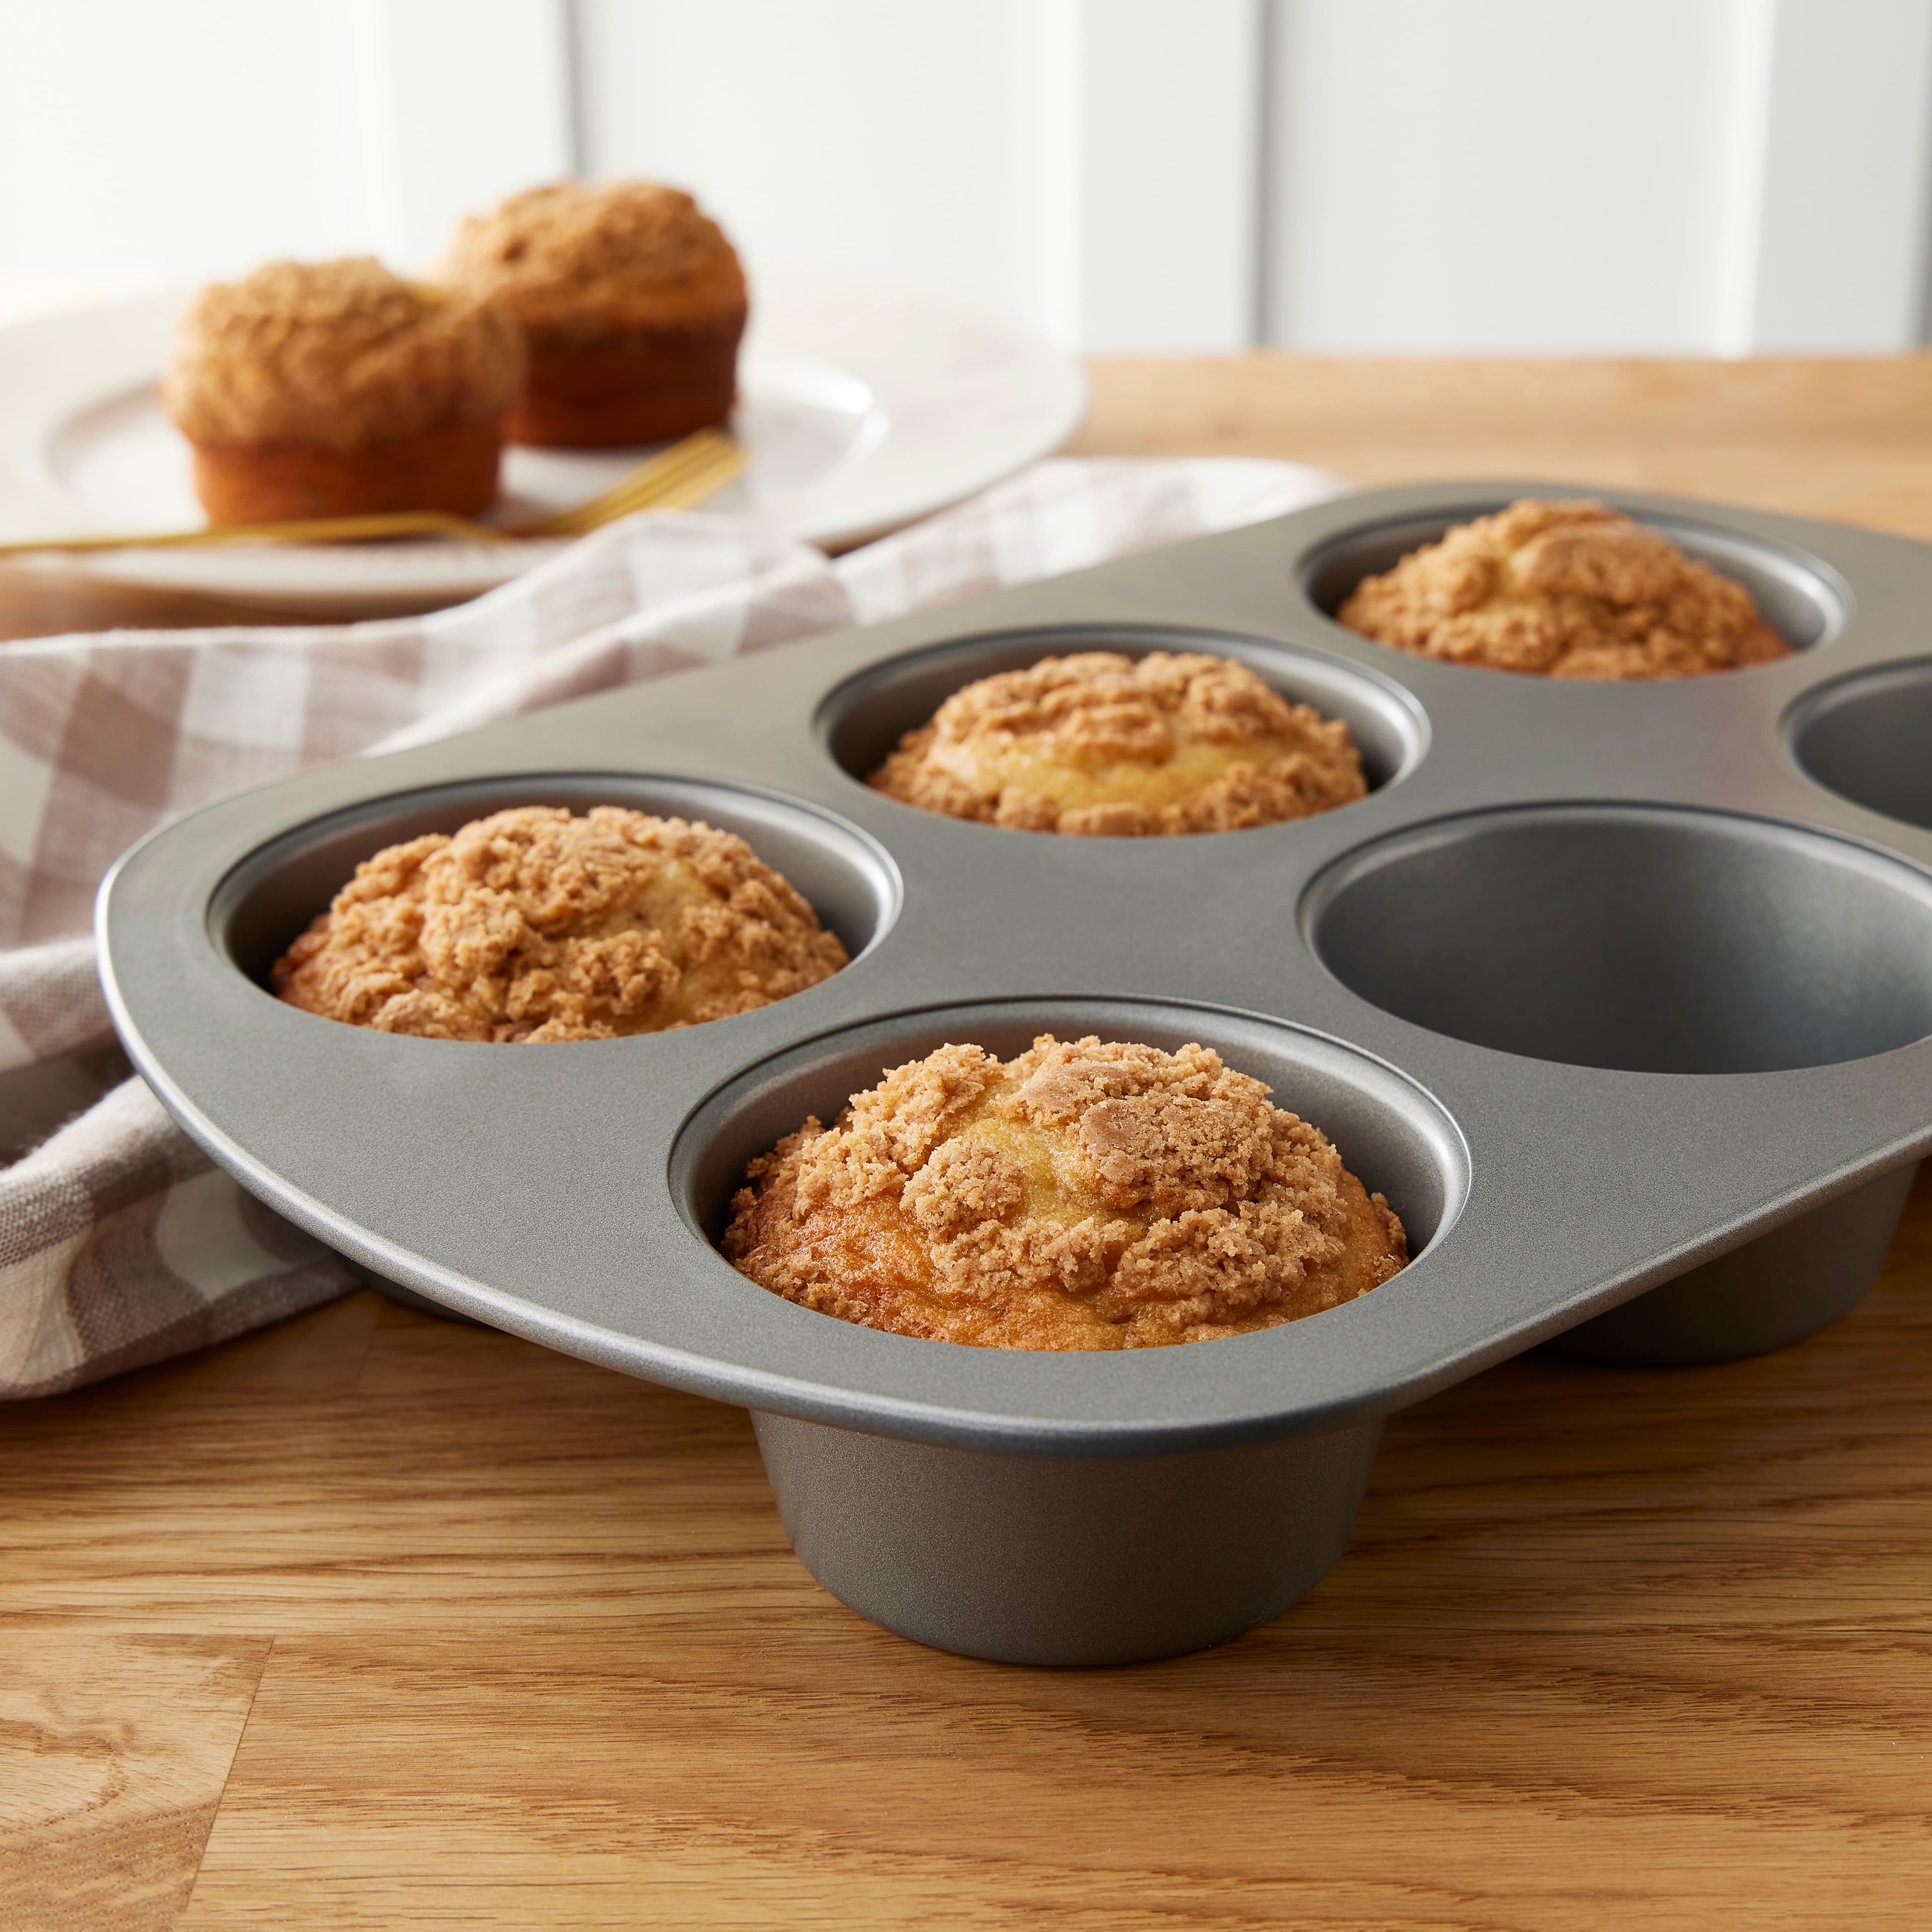 Tiawudi 2 Pack Nonstick Muffin Pan, Carbon Steel Cupcake Pan, 6 Cup, Easy  to Clean and Perfect for Making Muffins or Cupcakes, Jumbo - Yahoo Shopping